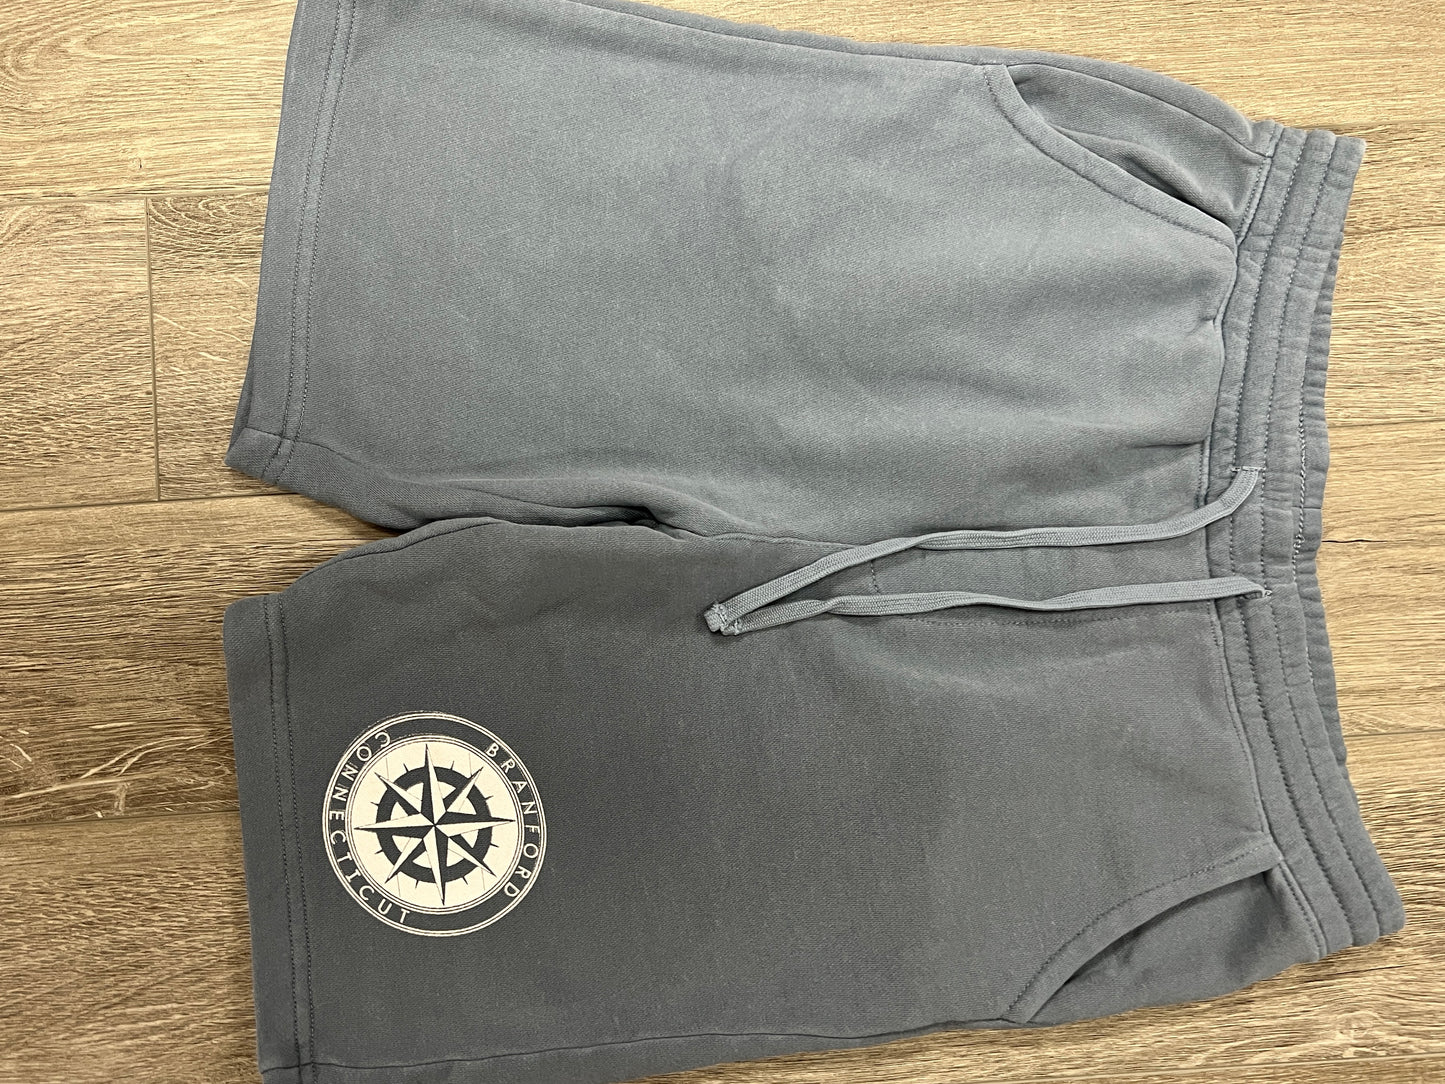 Branford Men's Shorts with Compass